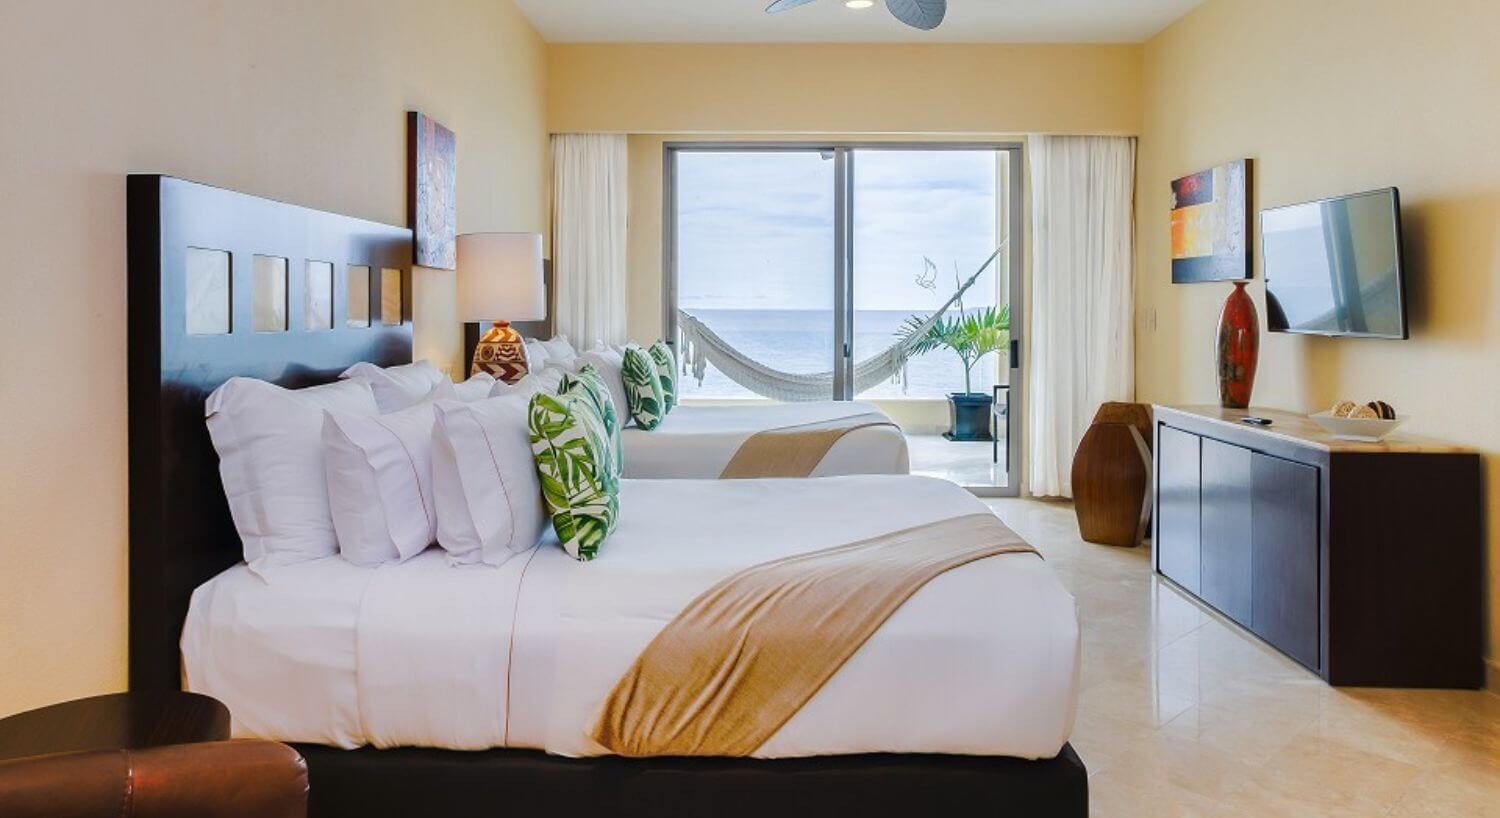 A bedroom with 2 Queen beds with white, tan and green bedding, dark wood headboard, a leather armchair, a dresser and Flat Screen TV on the opposite wall, and sliding doors leading out to a balcony with a hammock and ocean views.